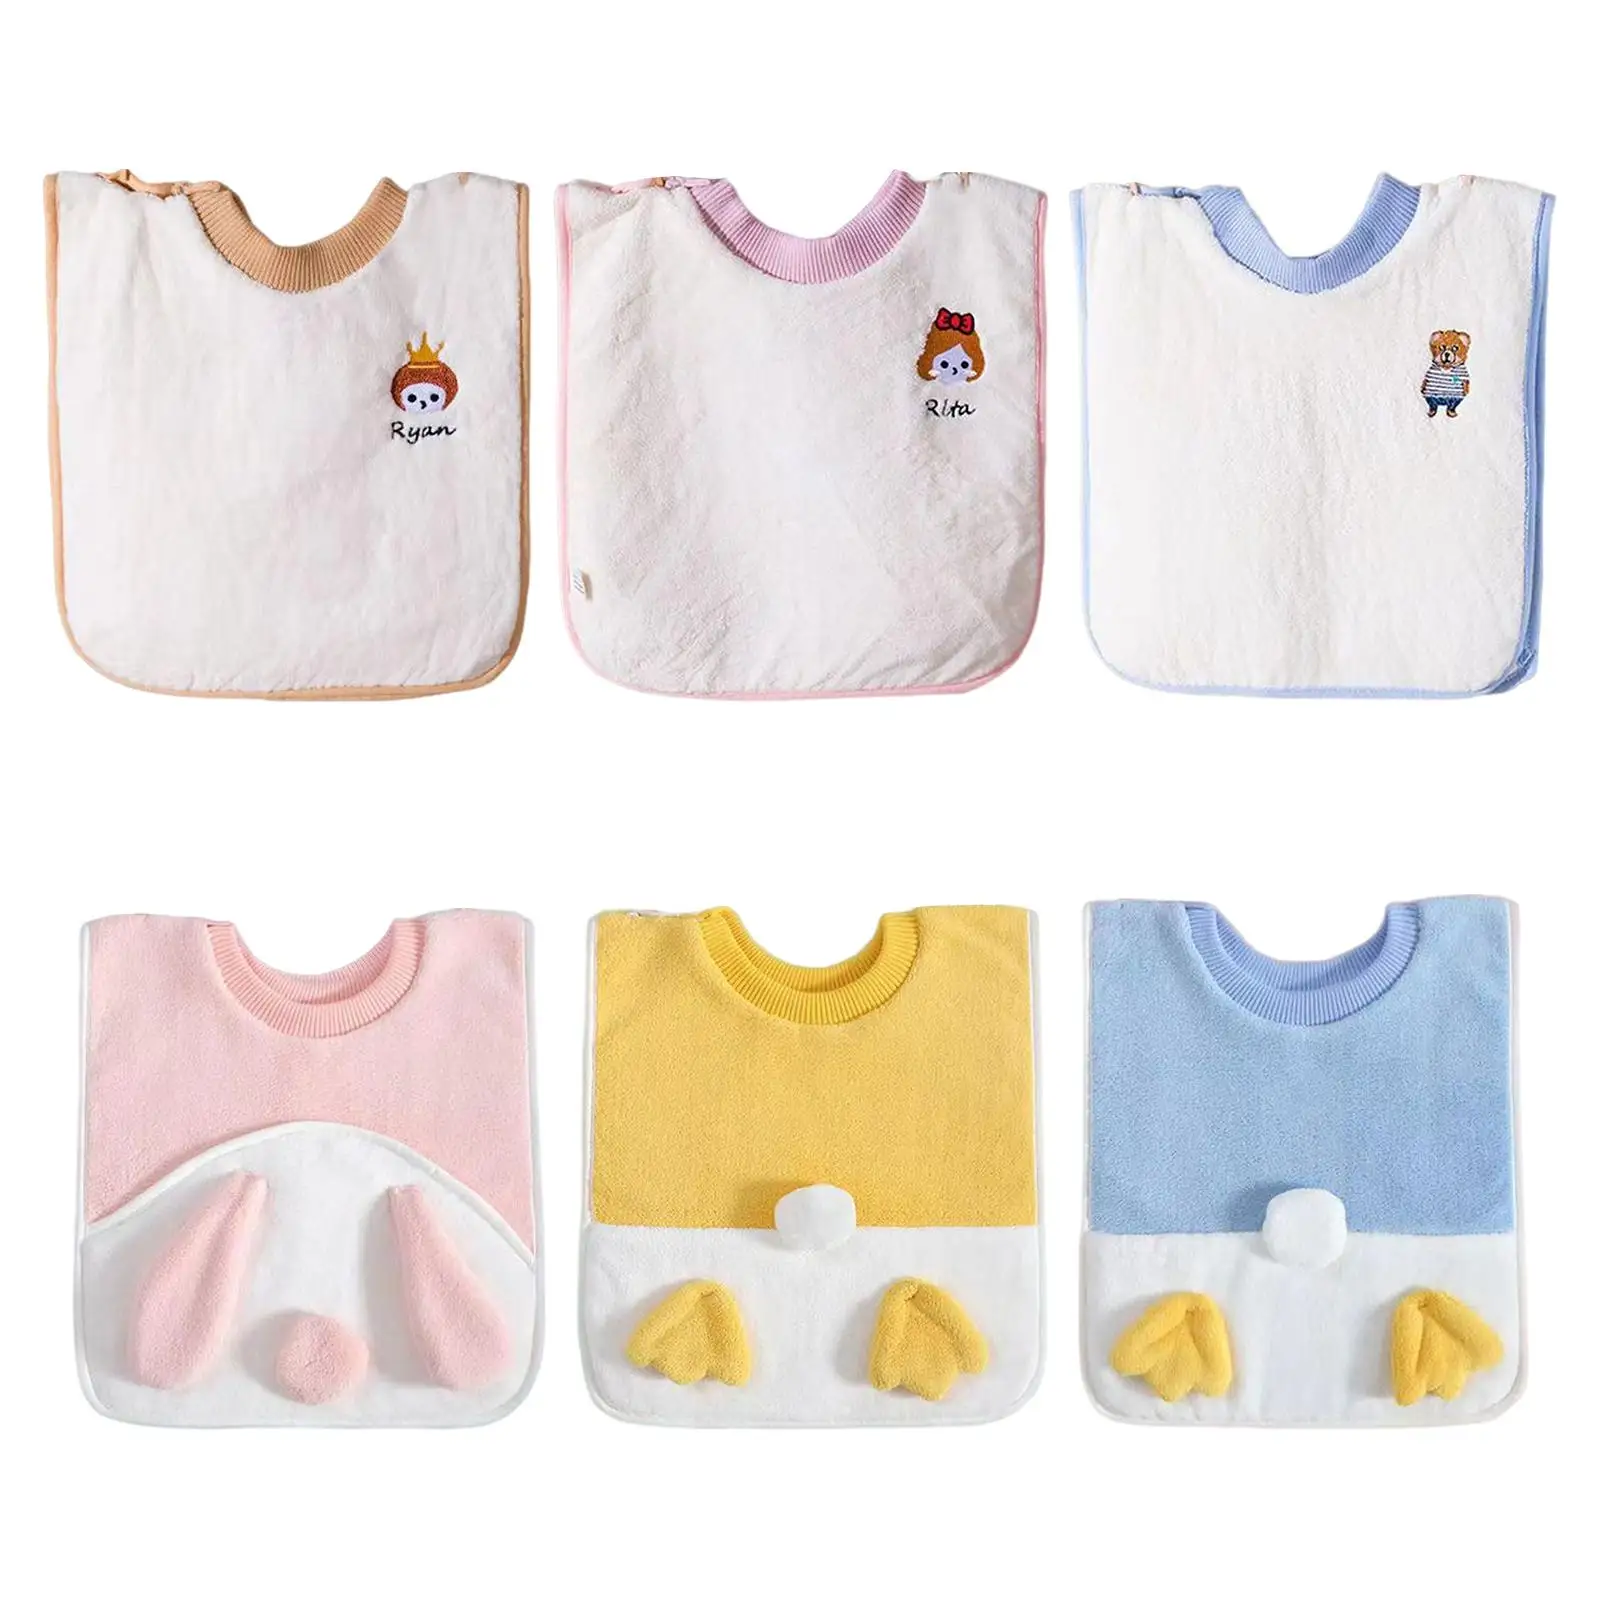 Kid Bib Easy Put on and Take Off Waterproof Keep Kids Clothes Dry Machine Washable for 1-6 Years Kids Cute Baby Apron